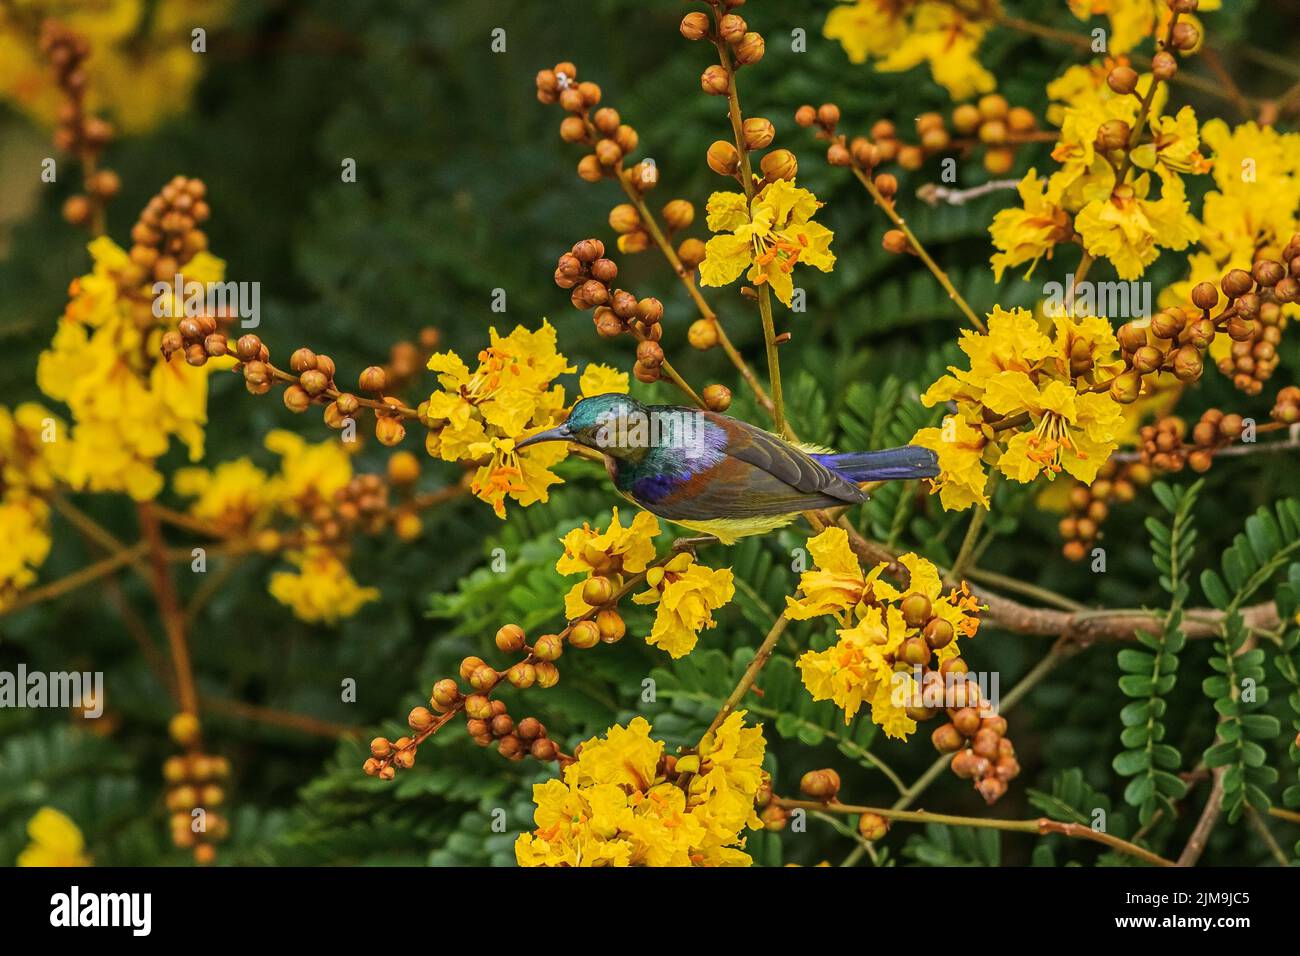 An Olive-backed sunbird perches amongst the yellow flowers of Yellow flametree in Malaysia. Stock Photo